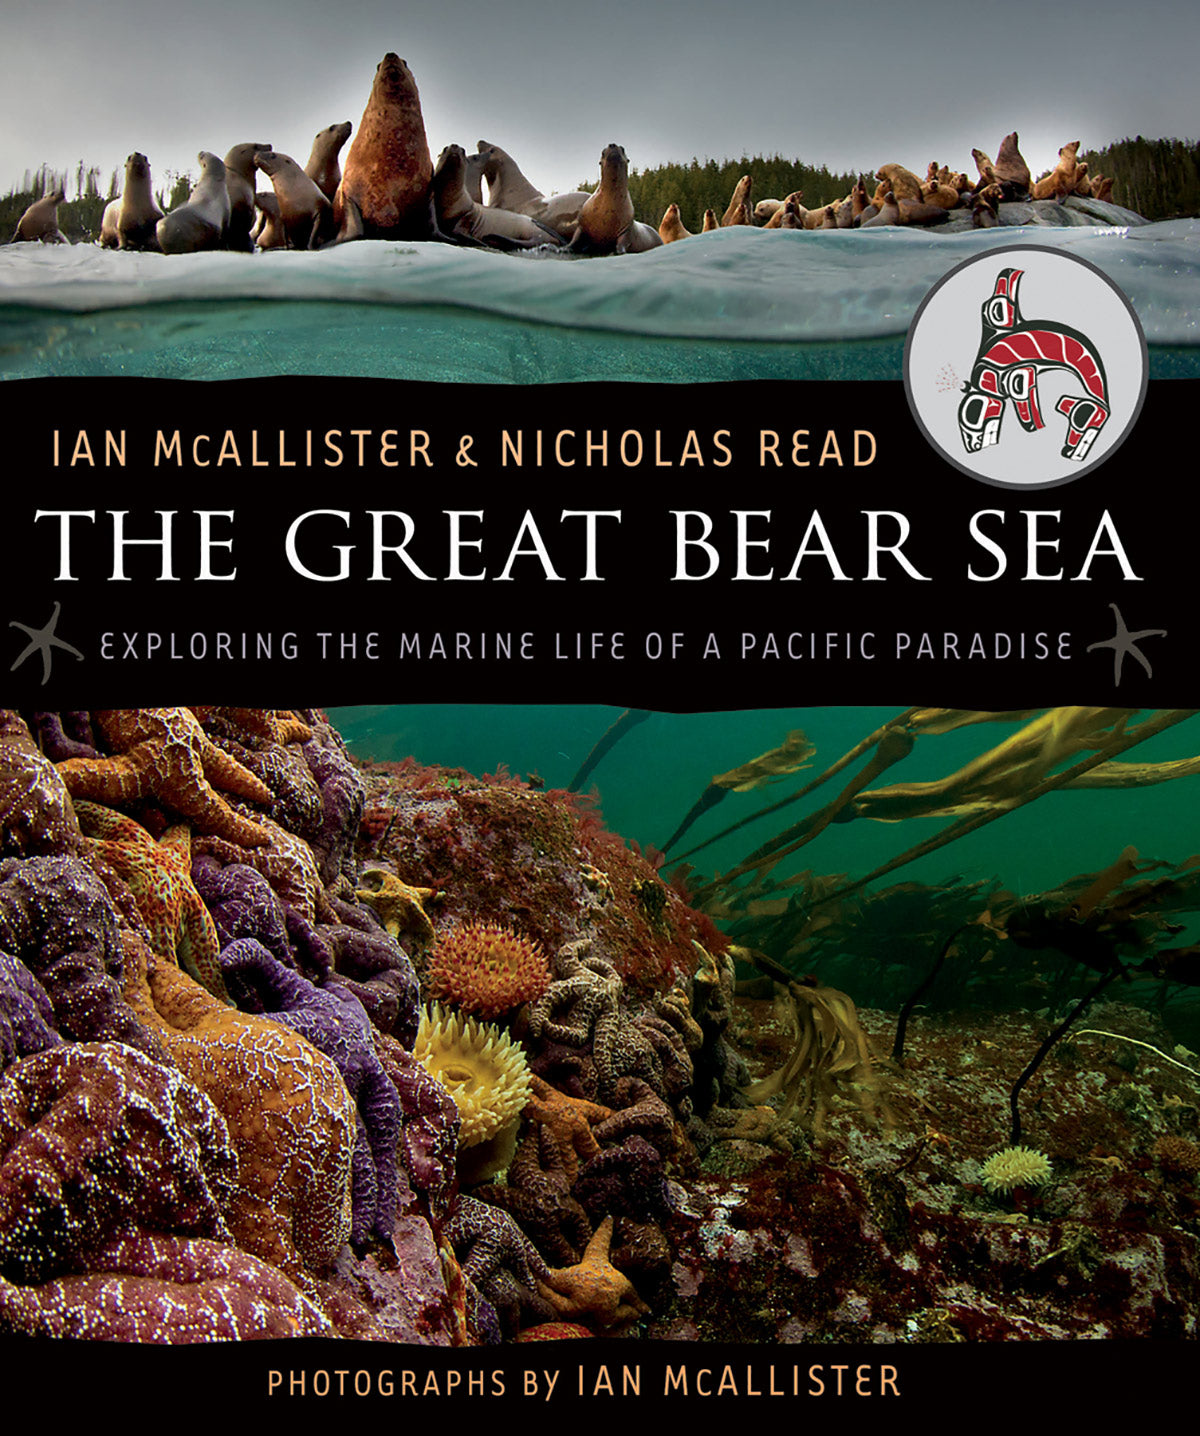 The Great Bear Sea by Ian McAllister and Nicholas Read